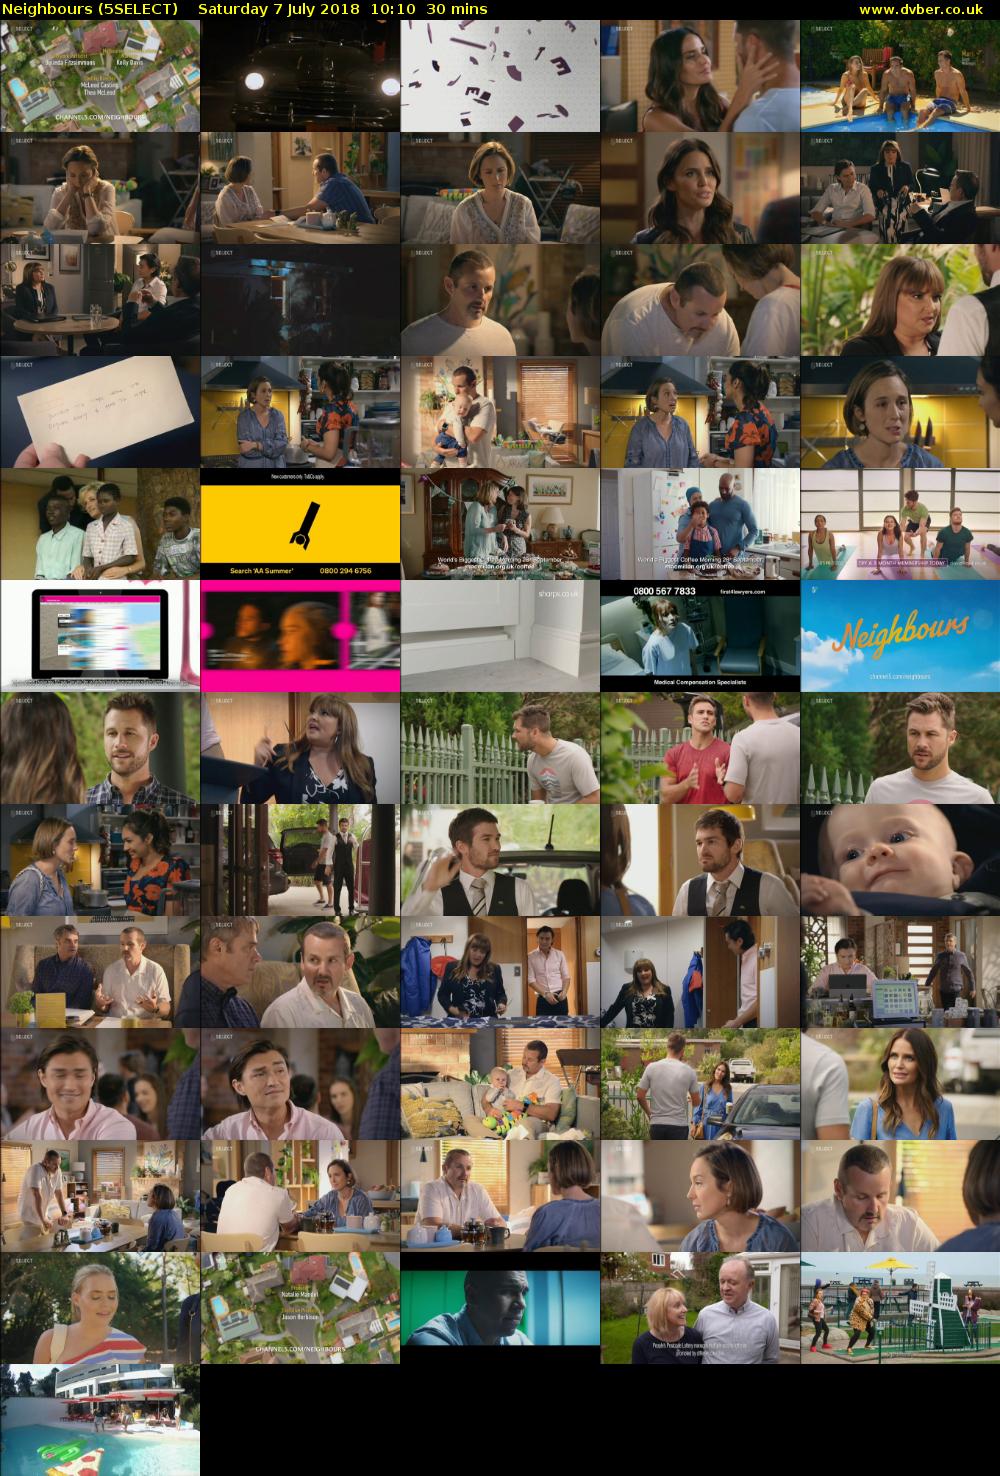 Neighbours (5SELECT) Saturday 7 July 2018 10:10 - 10:40